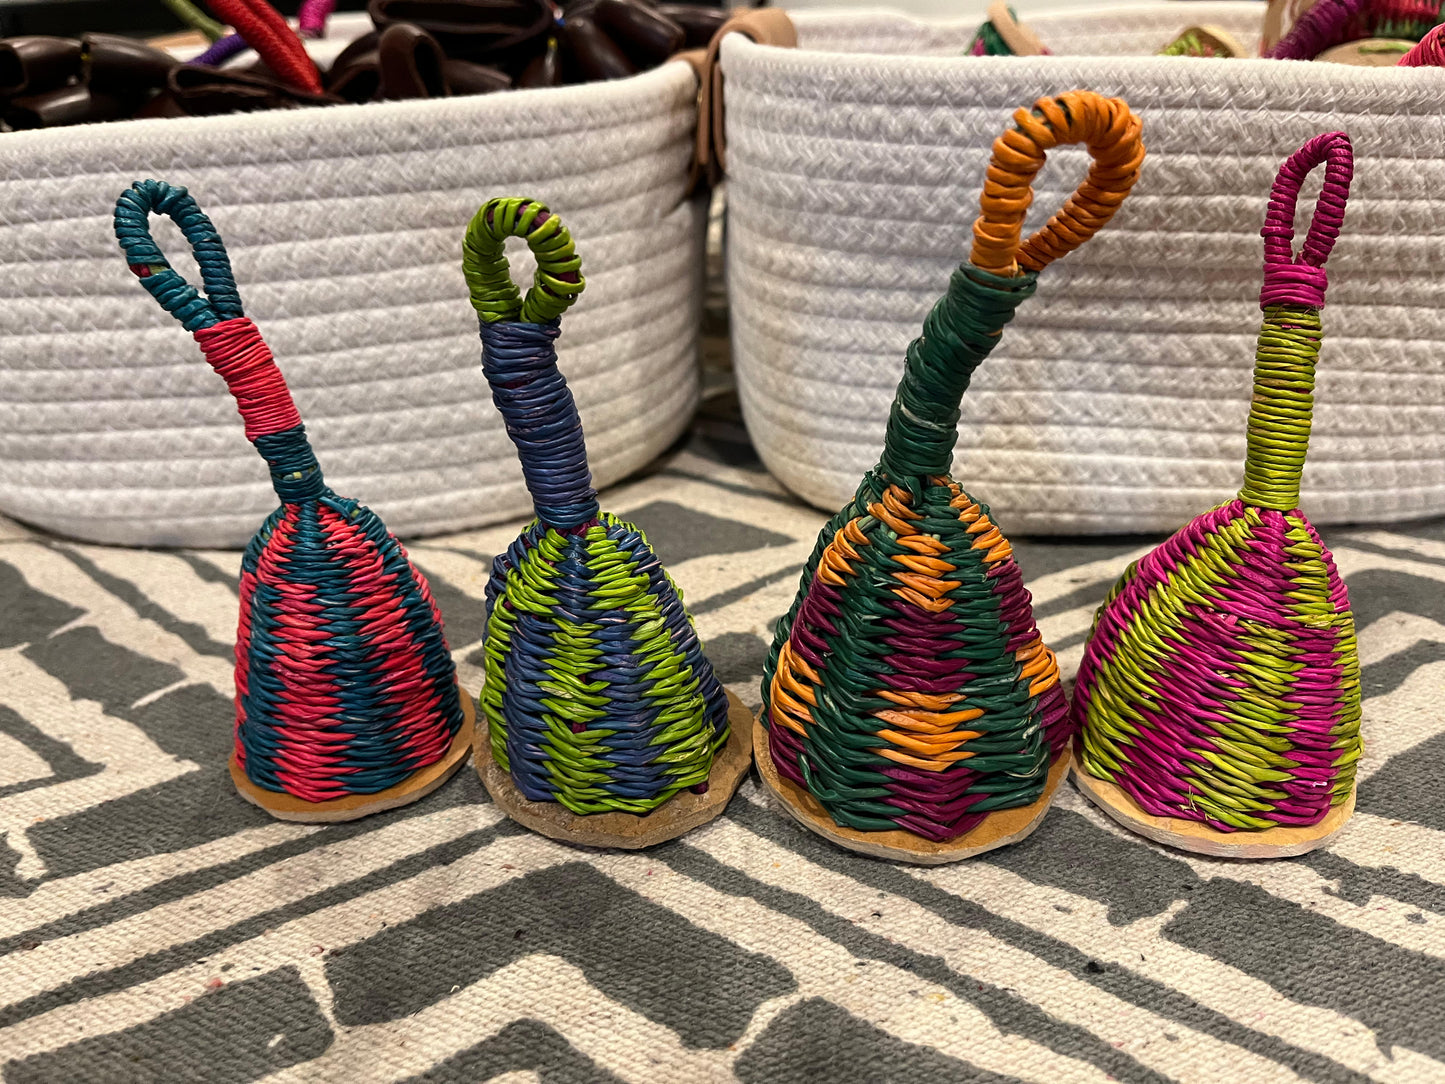 Caxixi (Basket Shakers)